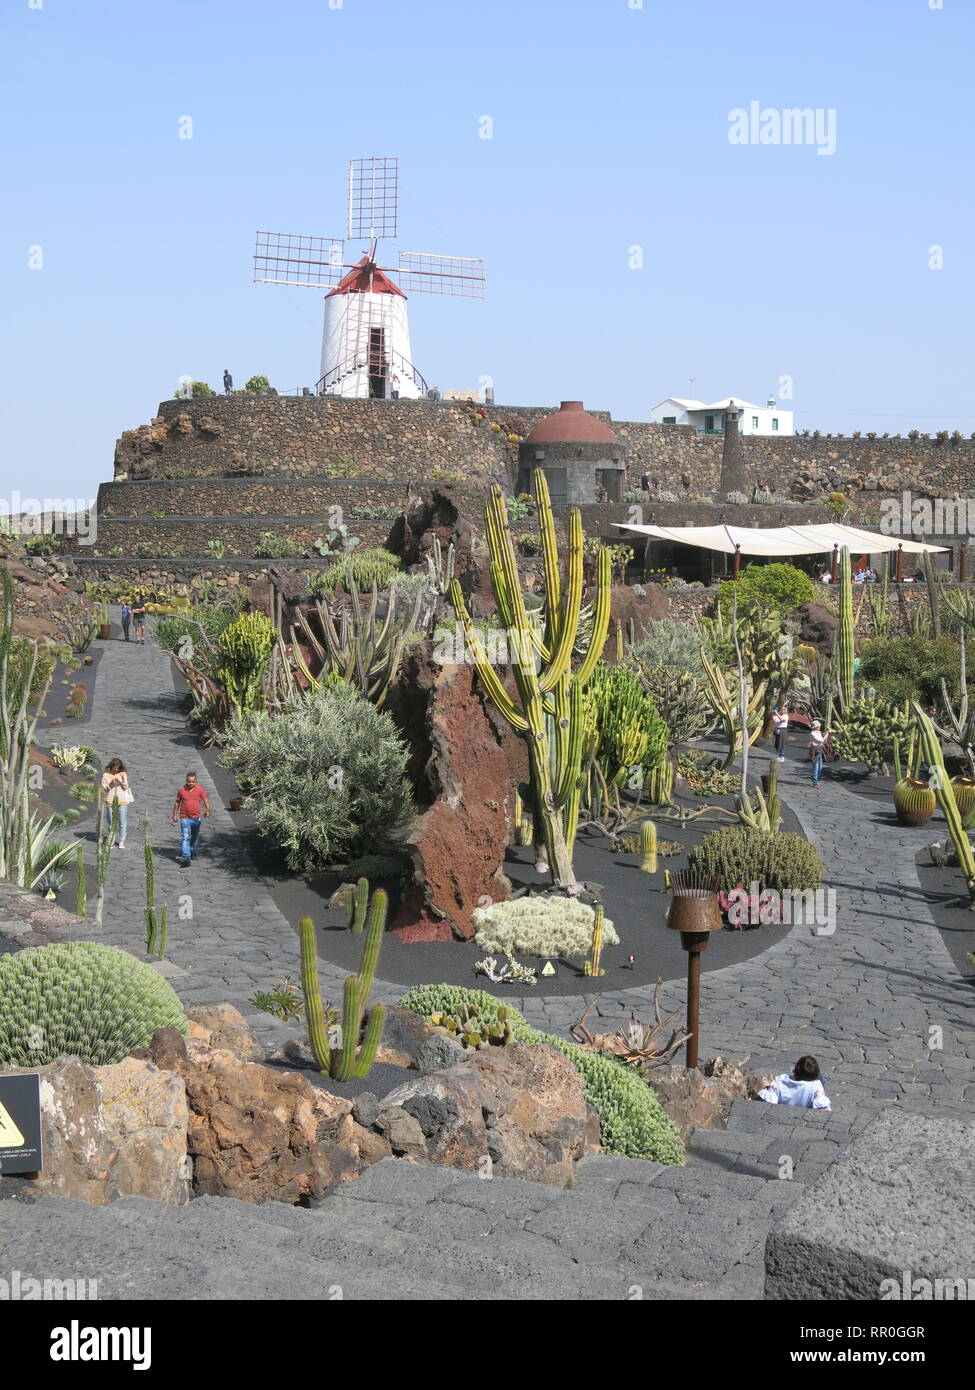 View Of The Windmill And Ornamental Cactus Plants At The Cesar